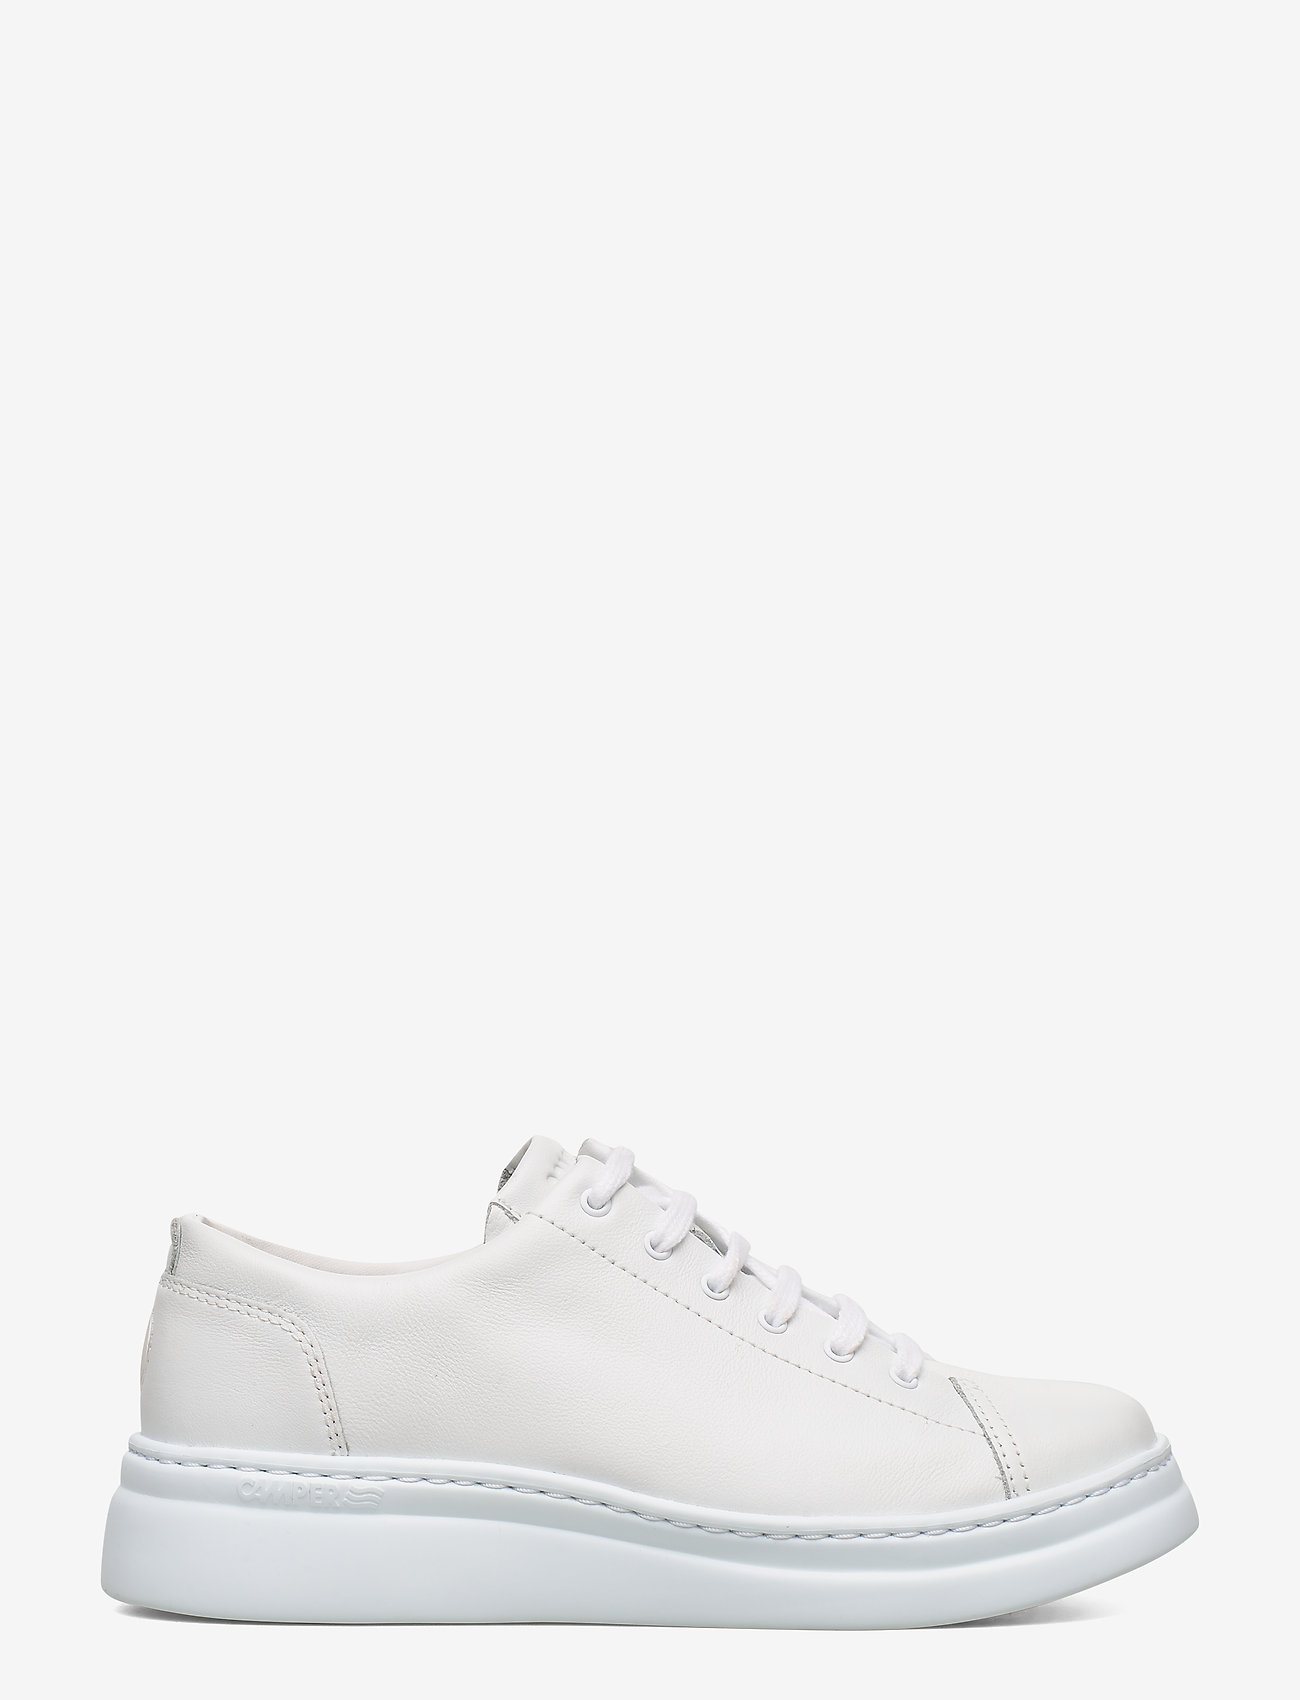 Camper - Runner Up - lave sneakers - white natural - 1